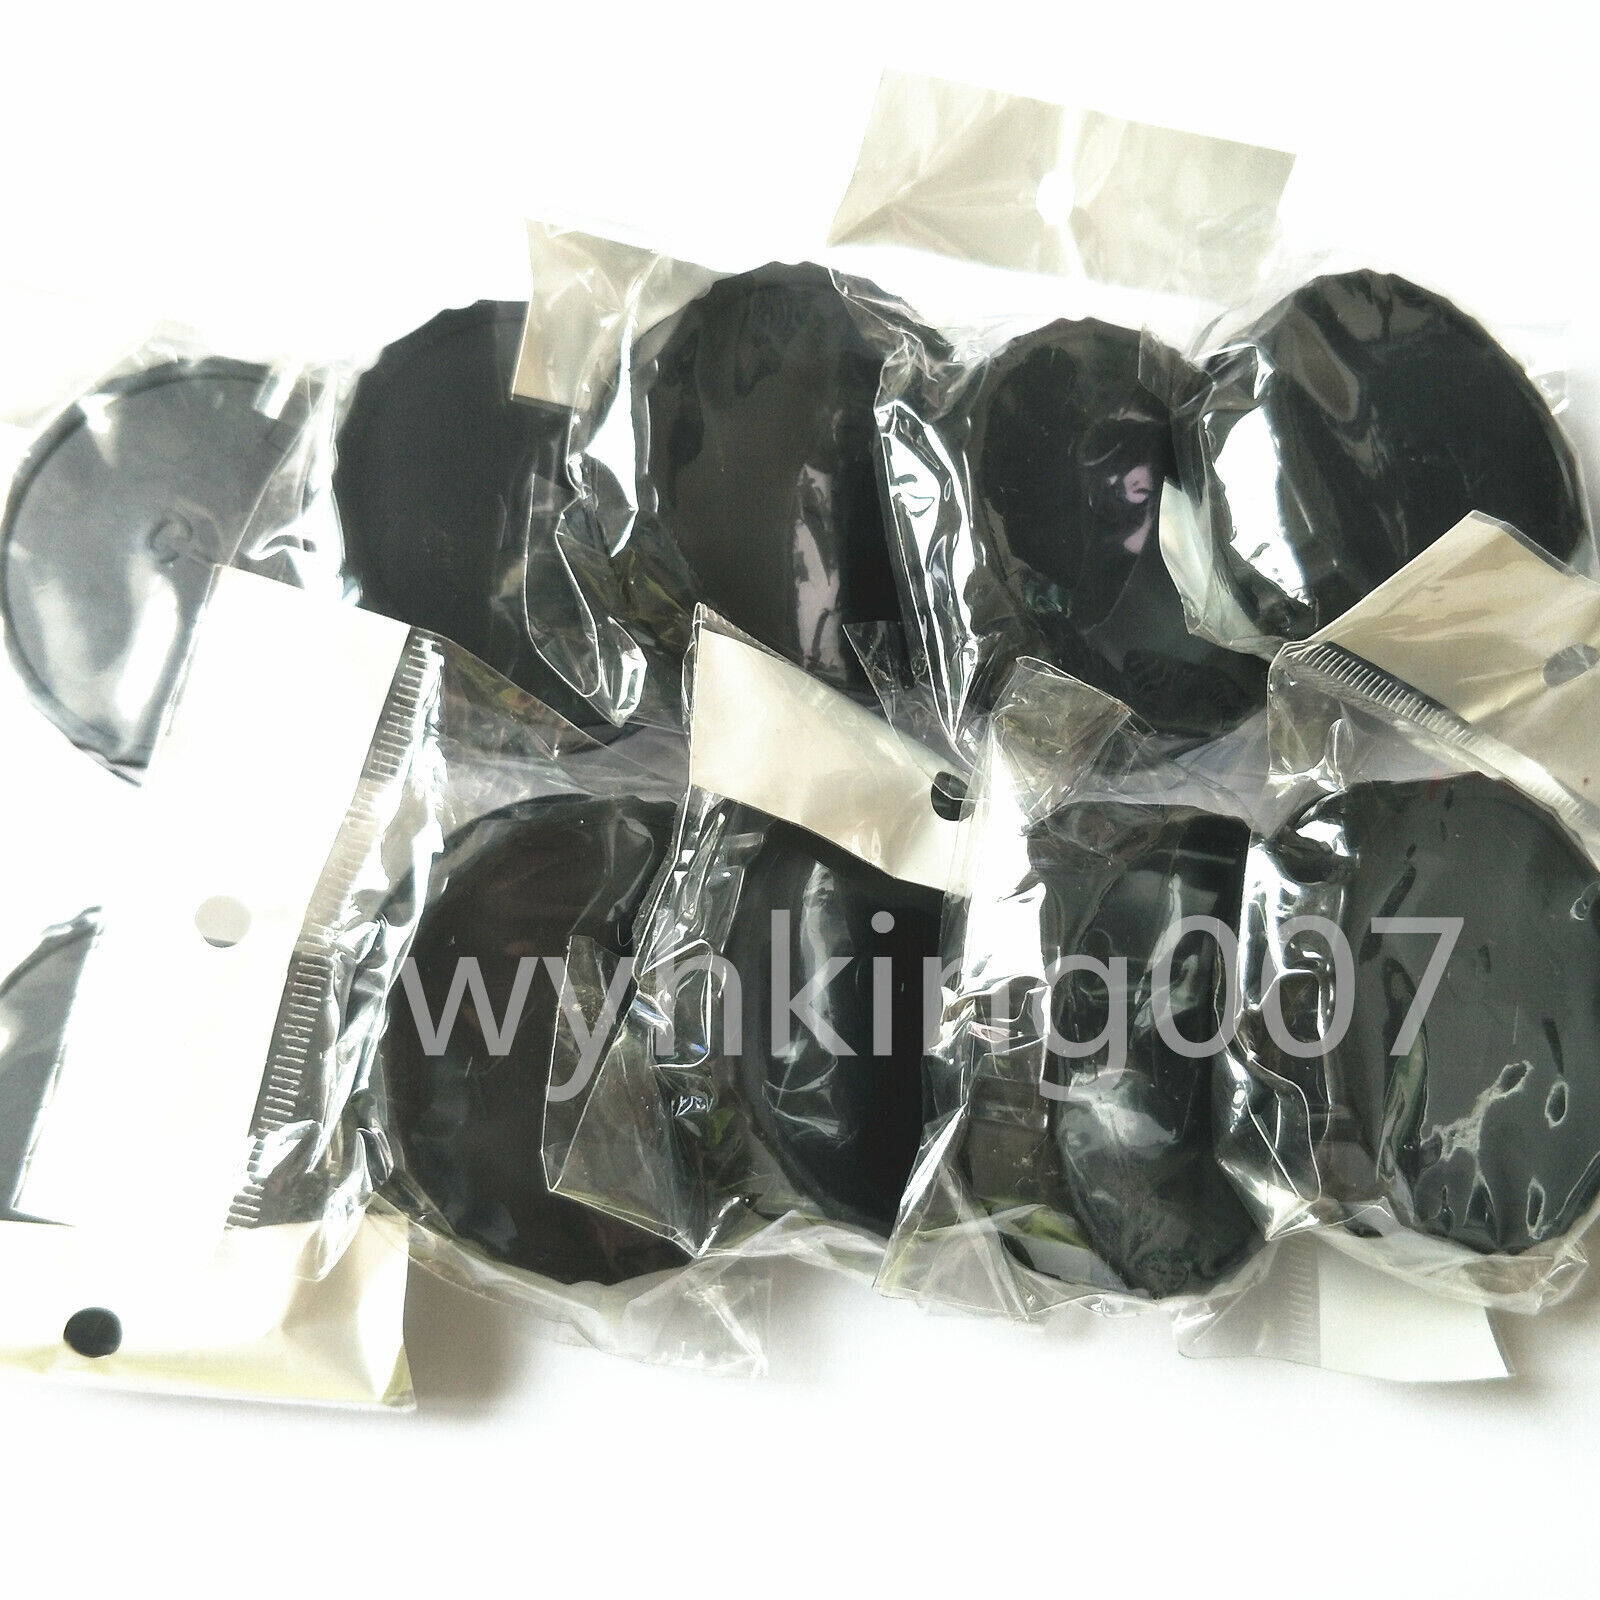 10pcs Rear lens cap cover Hood for Contax Yashica CY C/Y mount lens Wholesale Contax/Yashica Does not apply